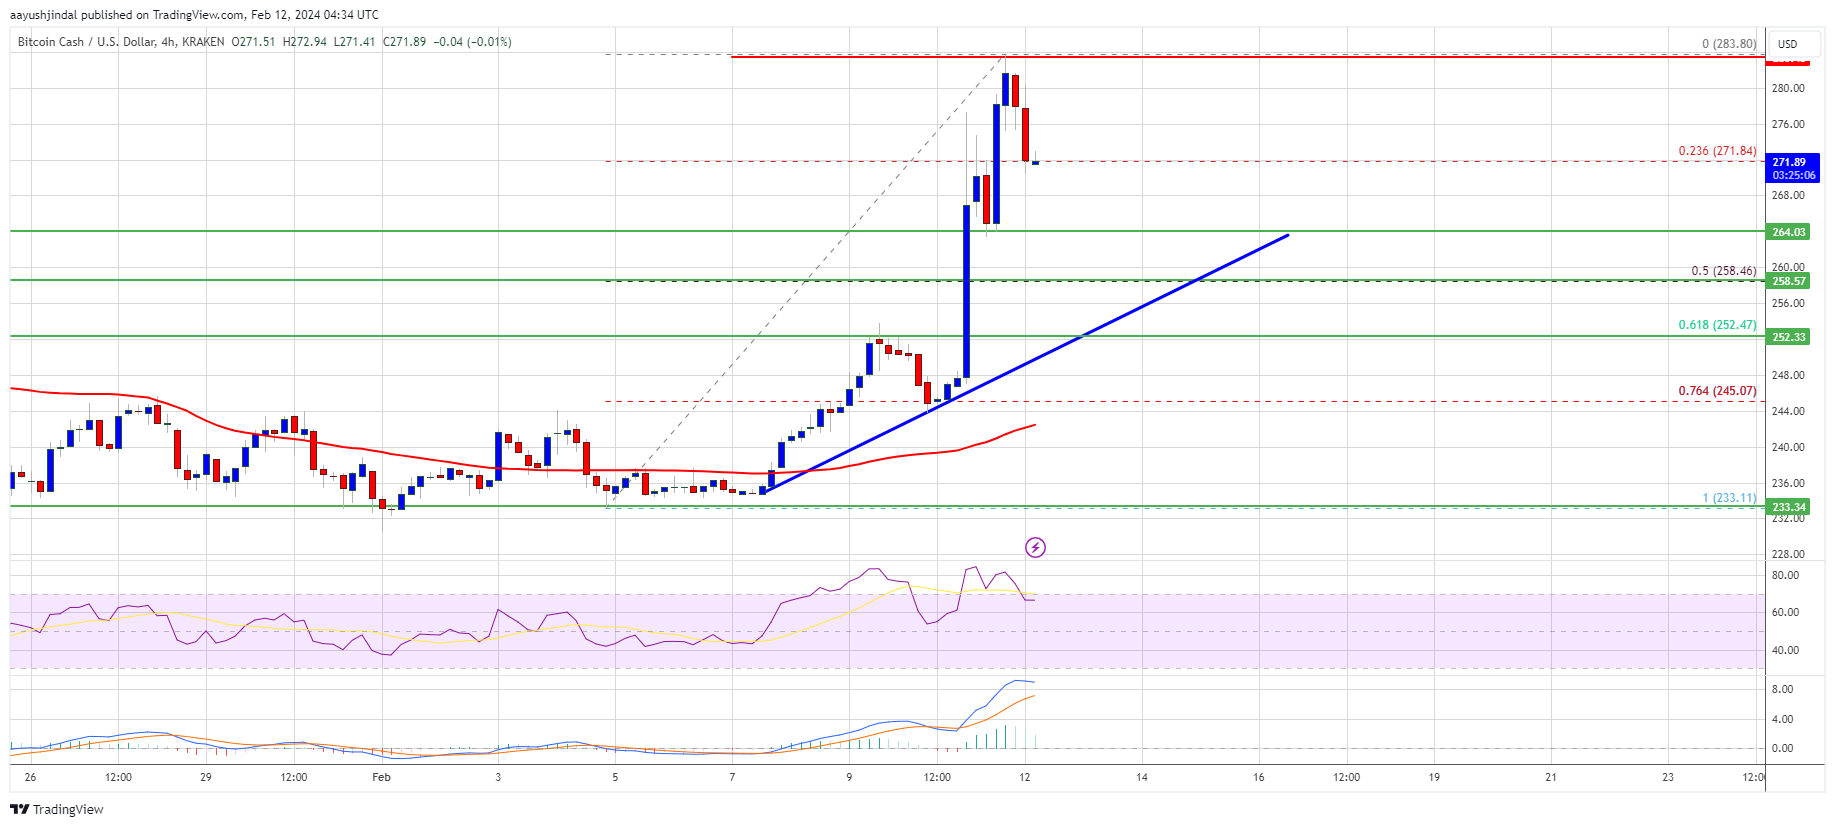 Bitcoin Cash Price Solid 15% Gain: Signs Point to Fresh BCH Rally Ahead